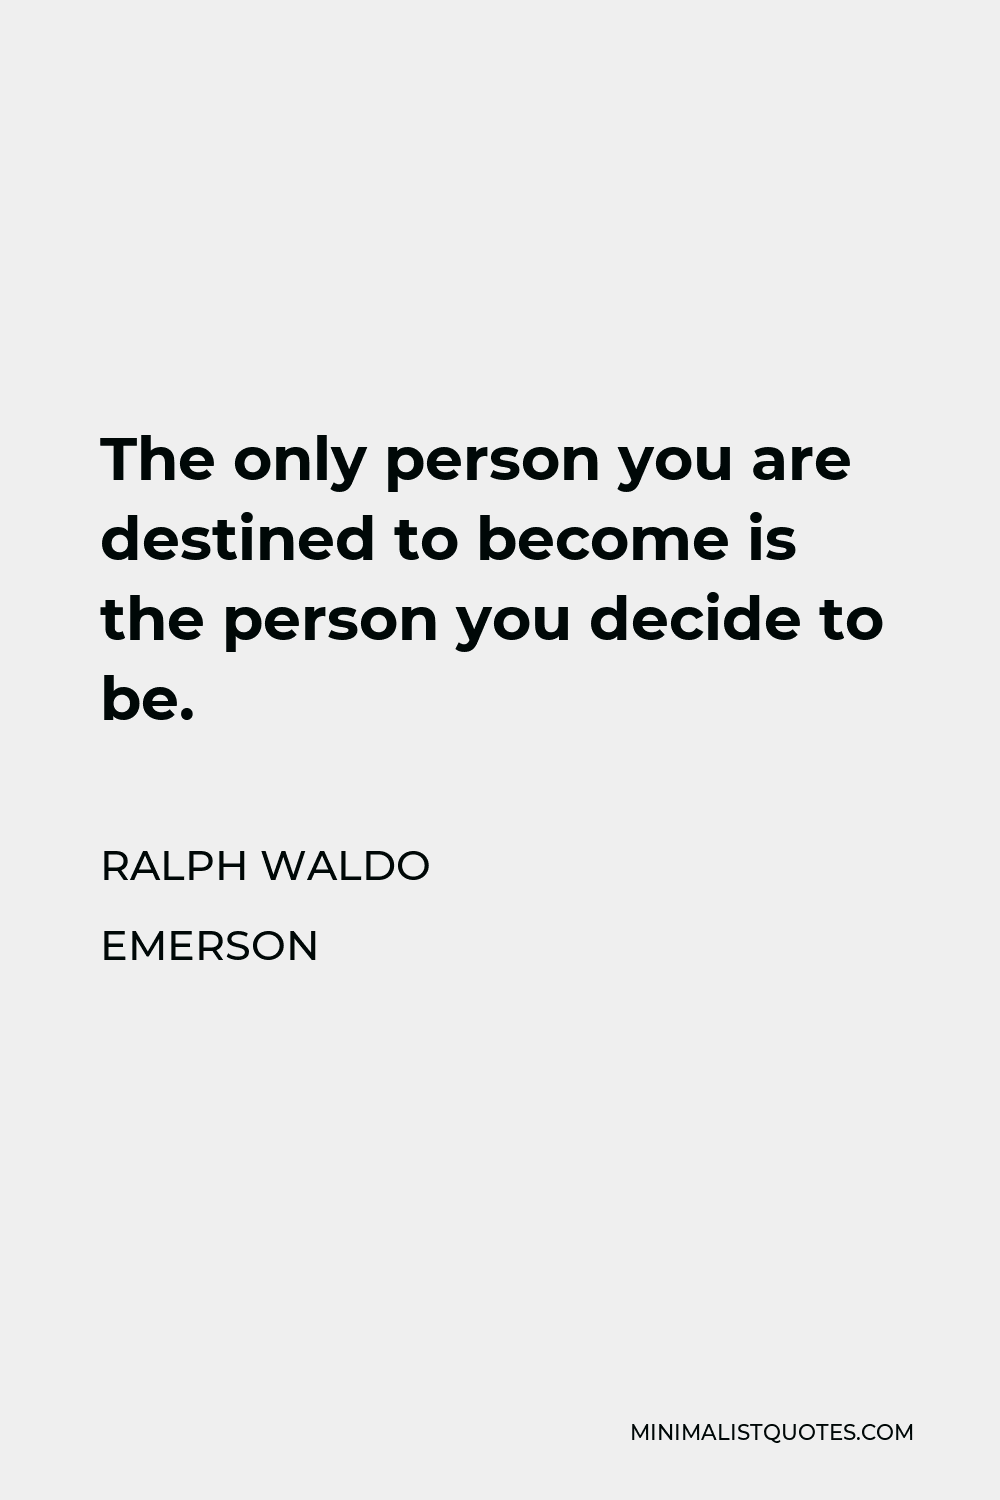 Ralph Waldo Emerson Quote - The only person you are destined to become is the person you decide to be.